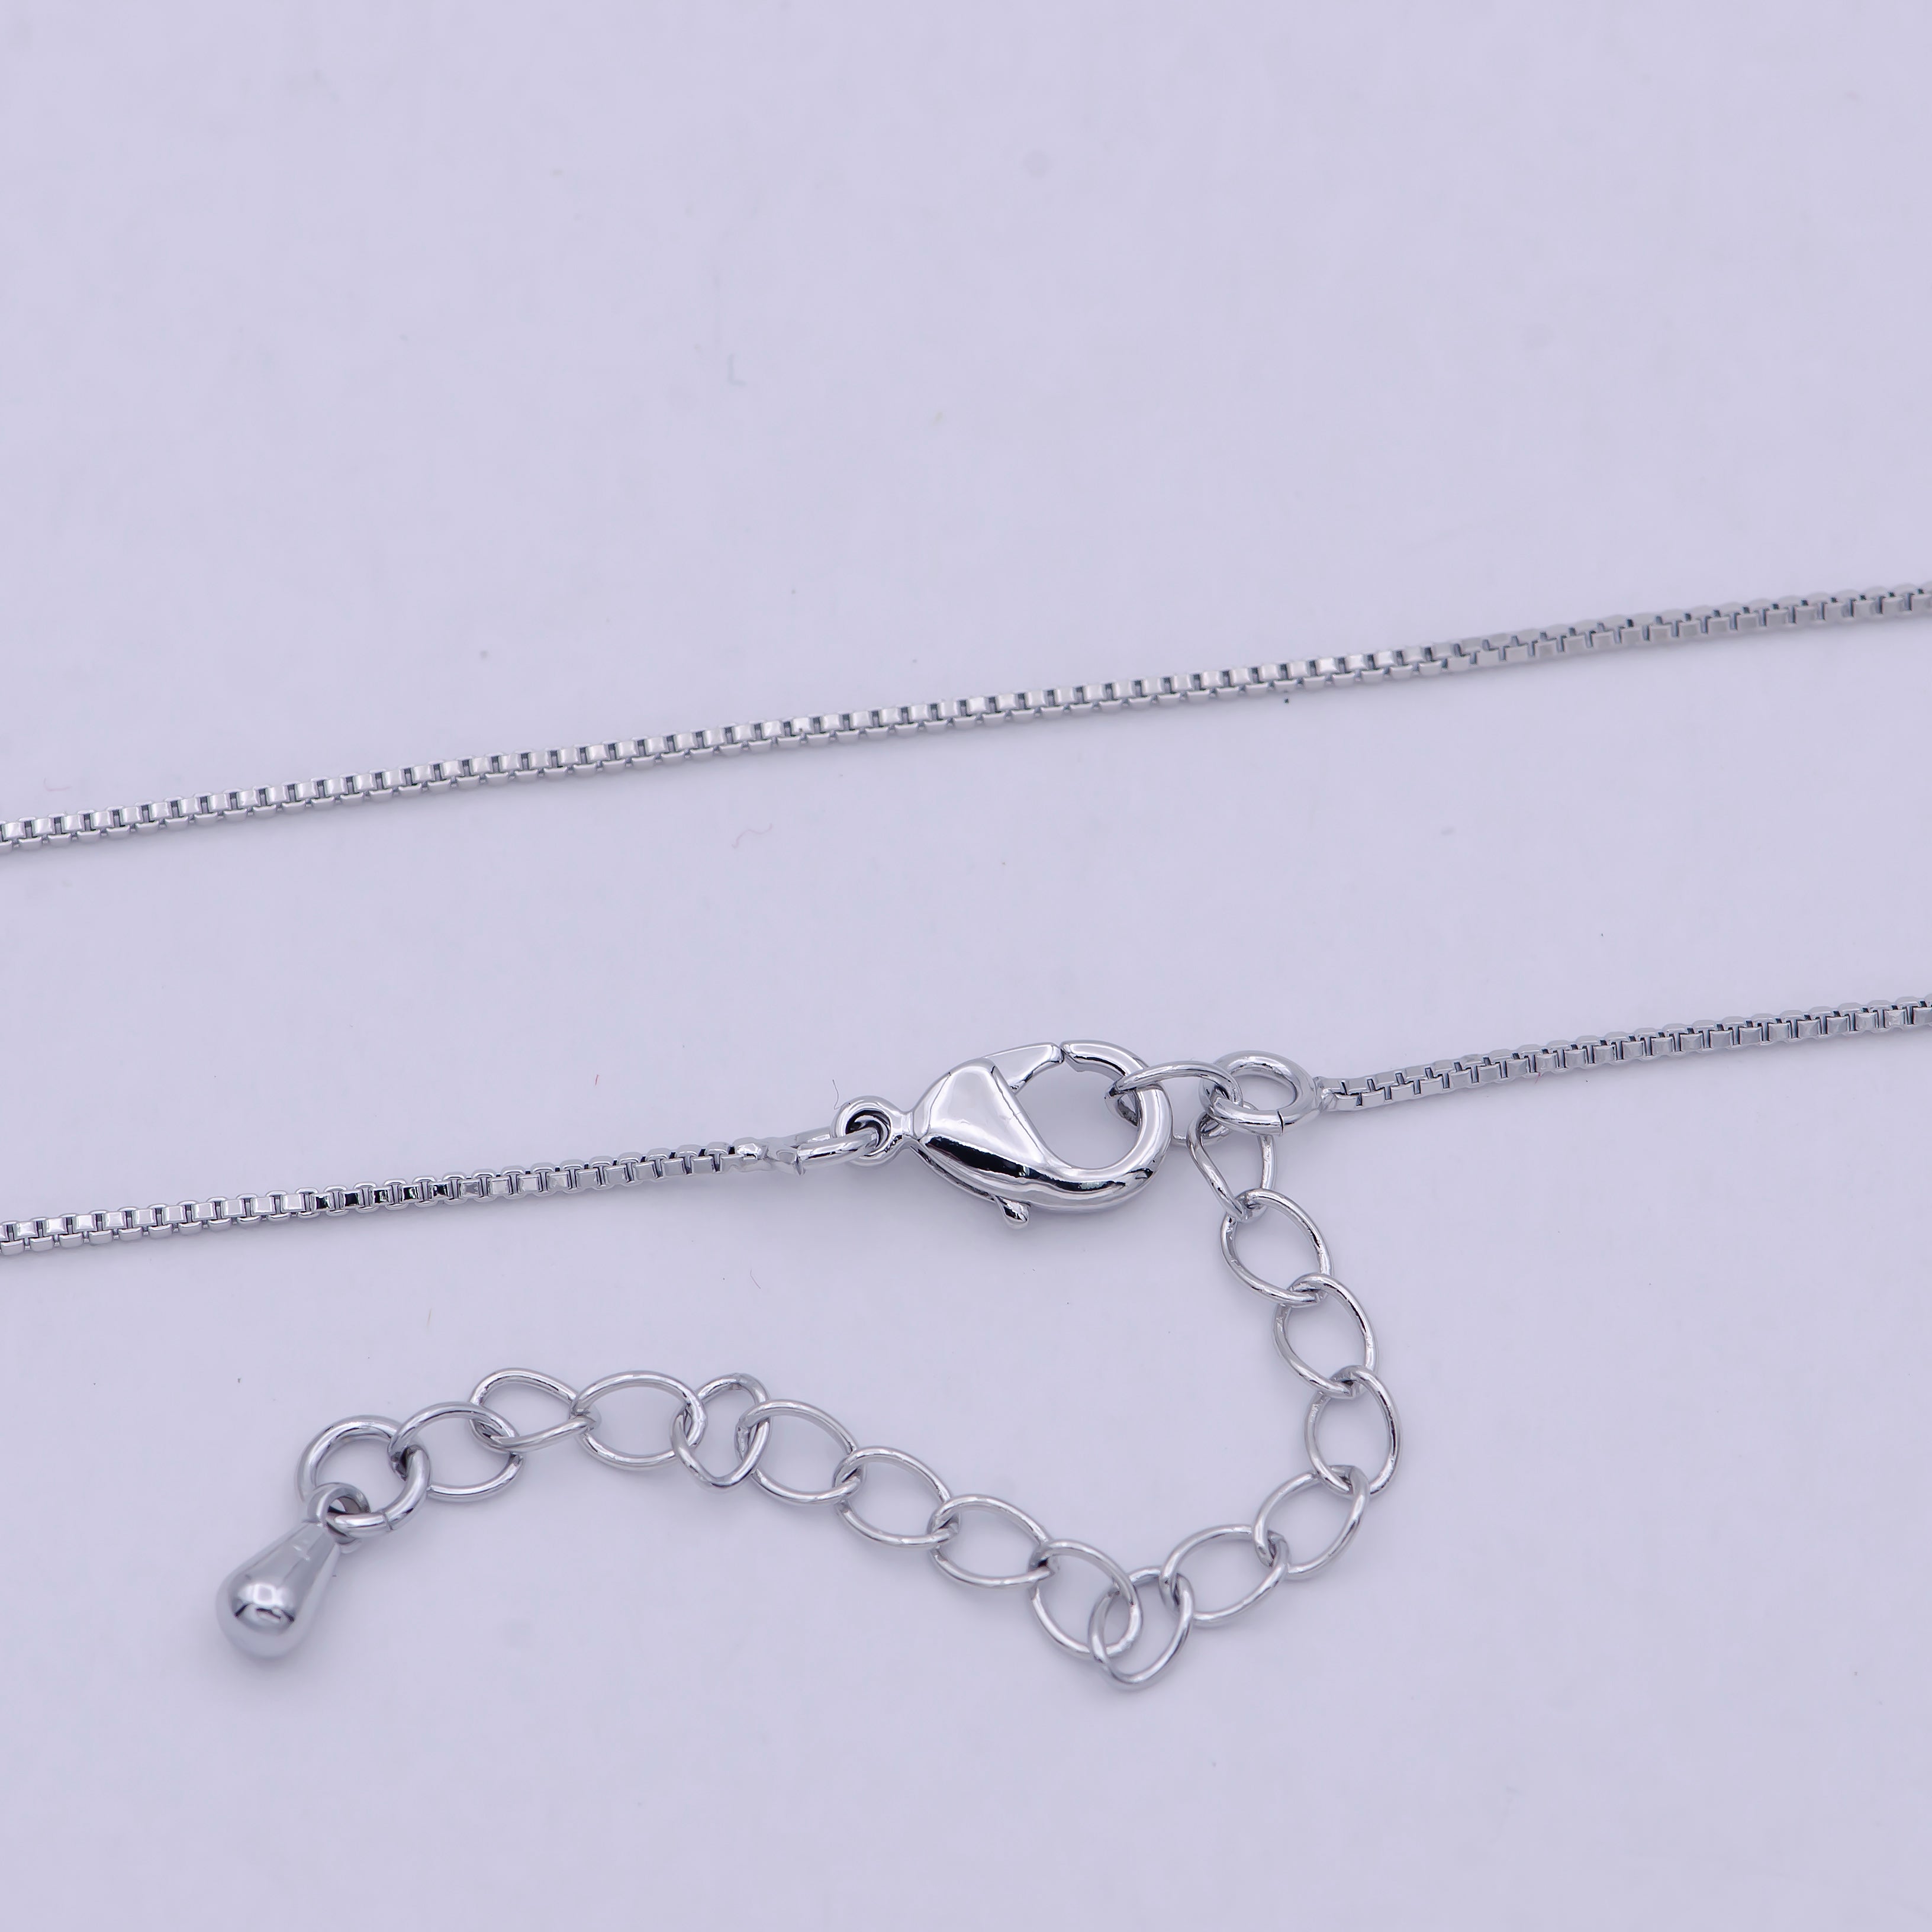 Dainty silver BOX chain finished chain everyday chain, simple silver chain ready to wear wa-795 - DLUXCA